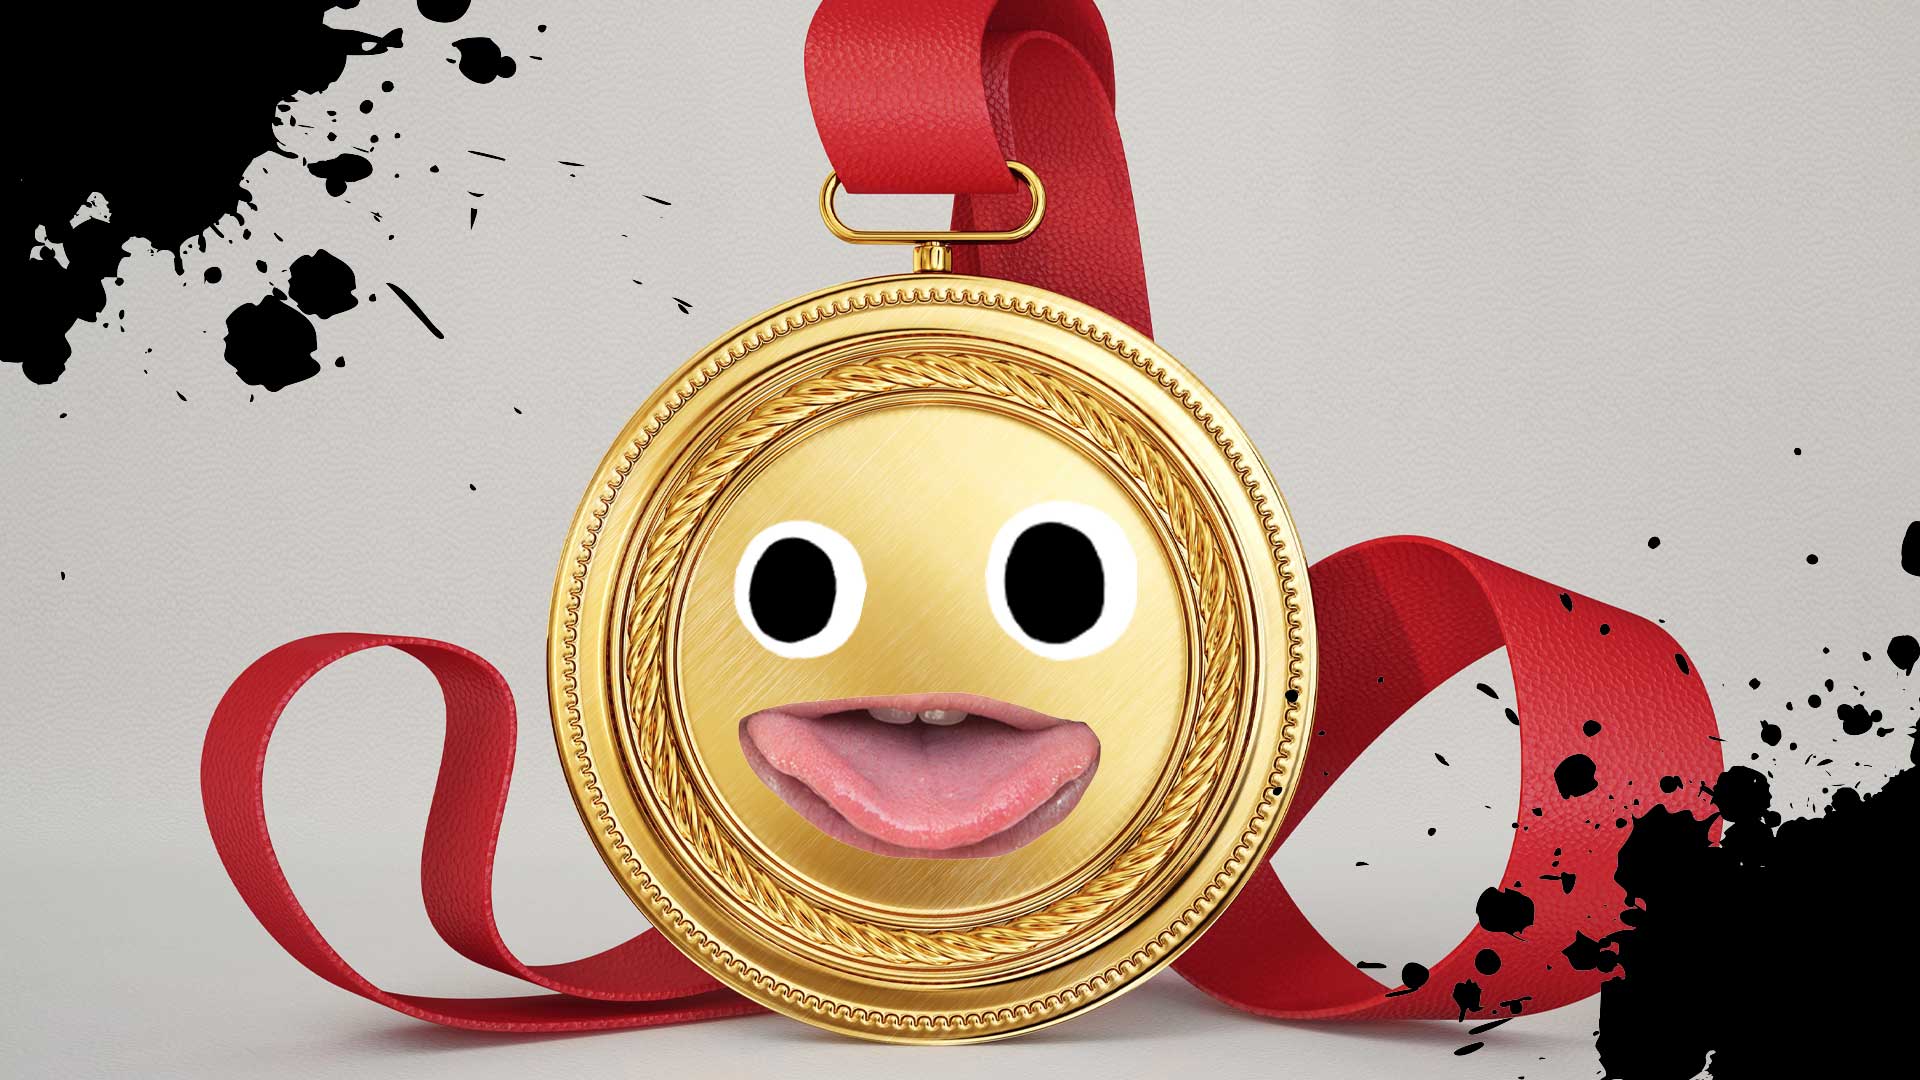 A cheeky gold medal surrounded by splats